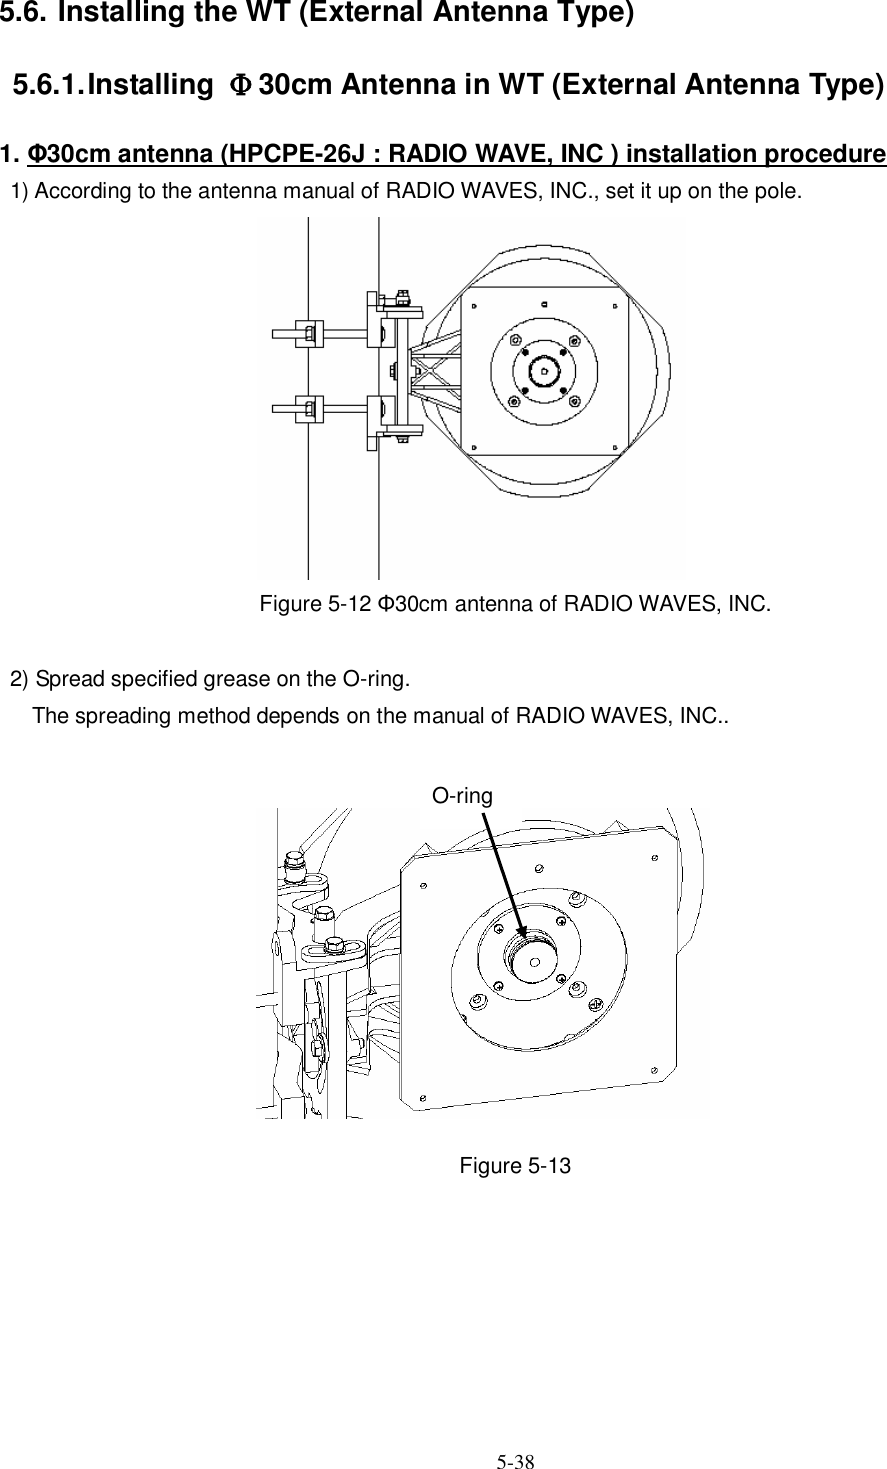   5-38  5.6. Installing the WT (External Antenna Type) 5.6.1. Installing  Φ30cm Antenna in WT (External Antenna Type) 1. Φ30cm antenna (HPCPE-26J : RADIO WAVE, INC ) installation procedure 1) According to the antenna manual of RADIO WAVES, INC., set it up on the pole.             Figure 5-12 Φ30cm antenna of RADIO WAVES, INC.    2) Spread specified grease on the O-ring.       The spreading method depends on the manual of RADIO WAVES, INC..            Figure 5-13      O-ring 